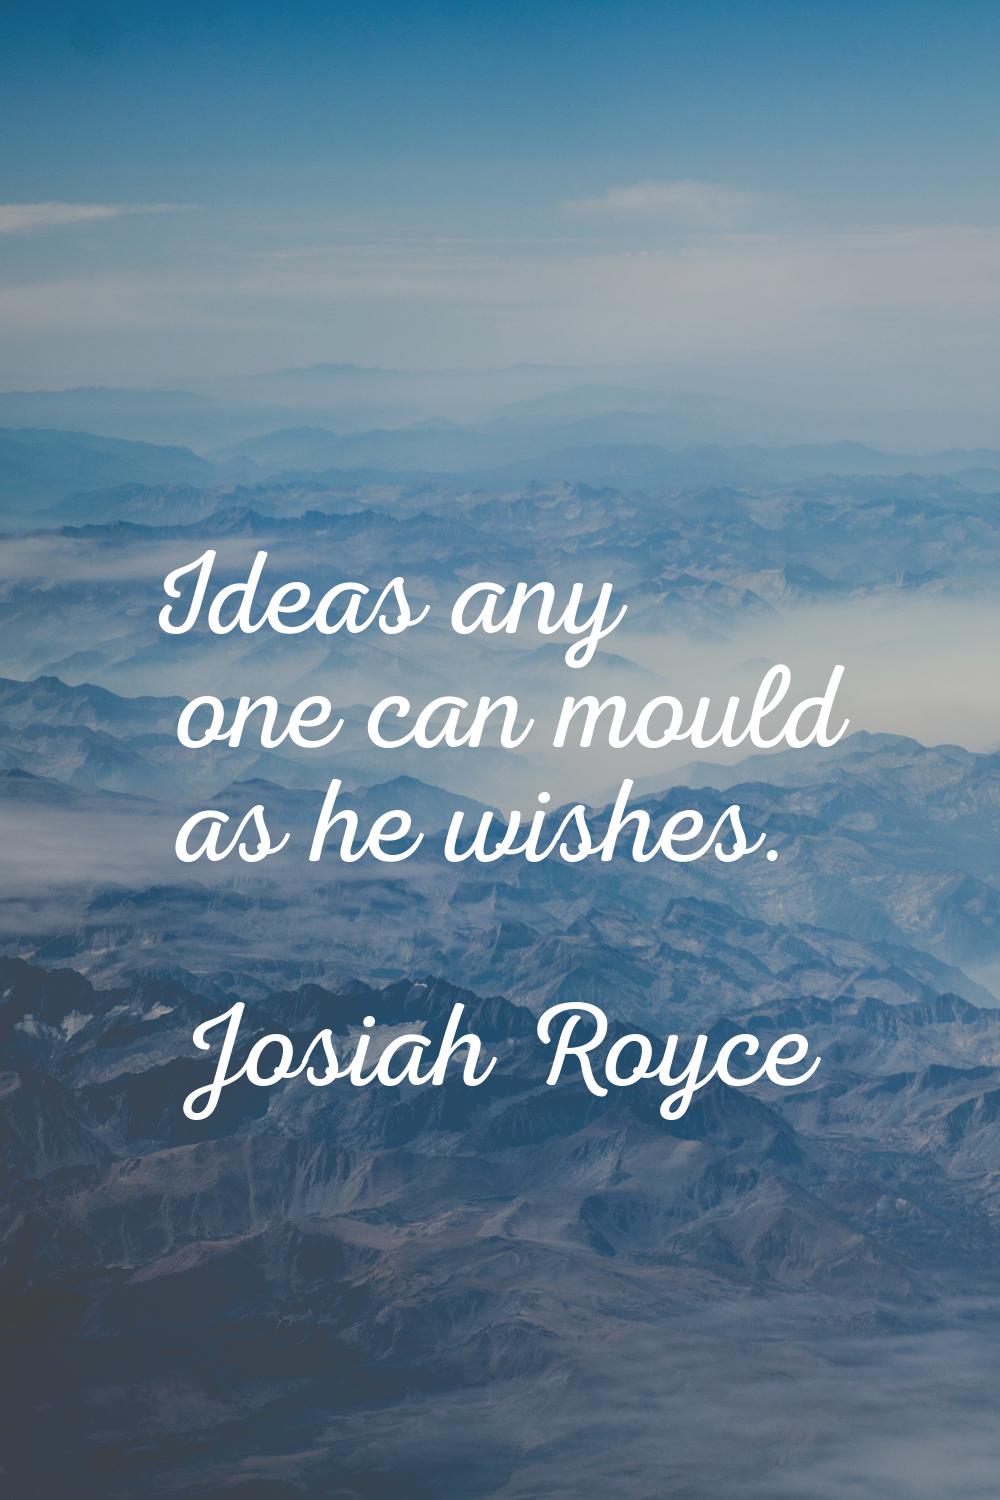 Ideas any one can mould as he wishes.